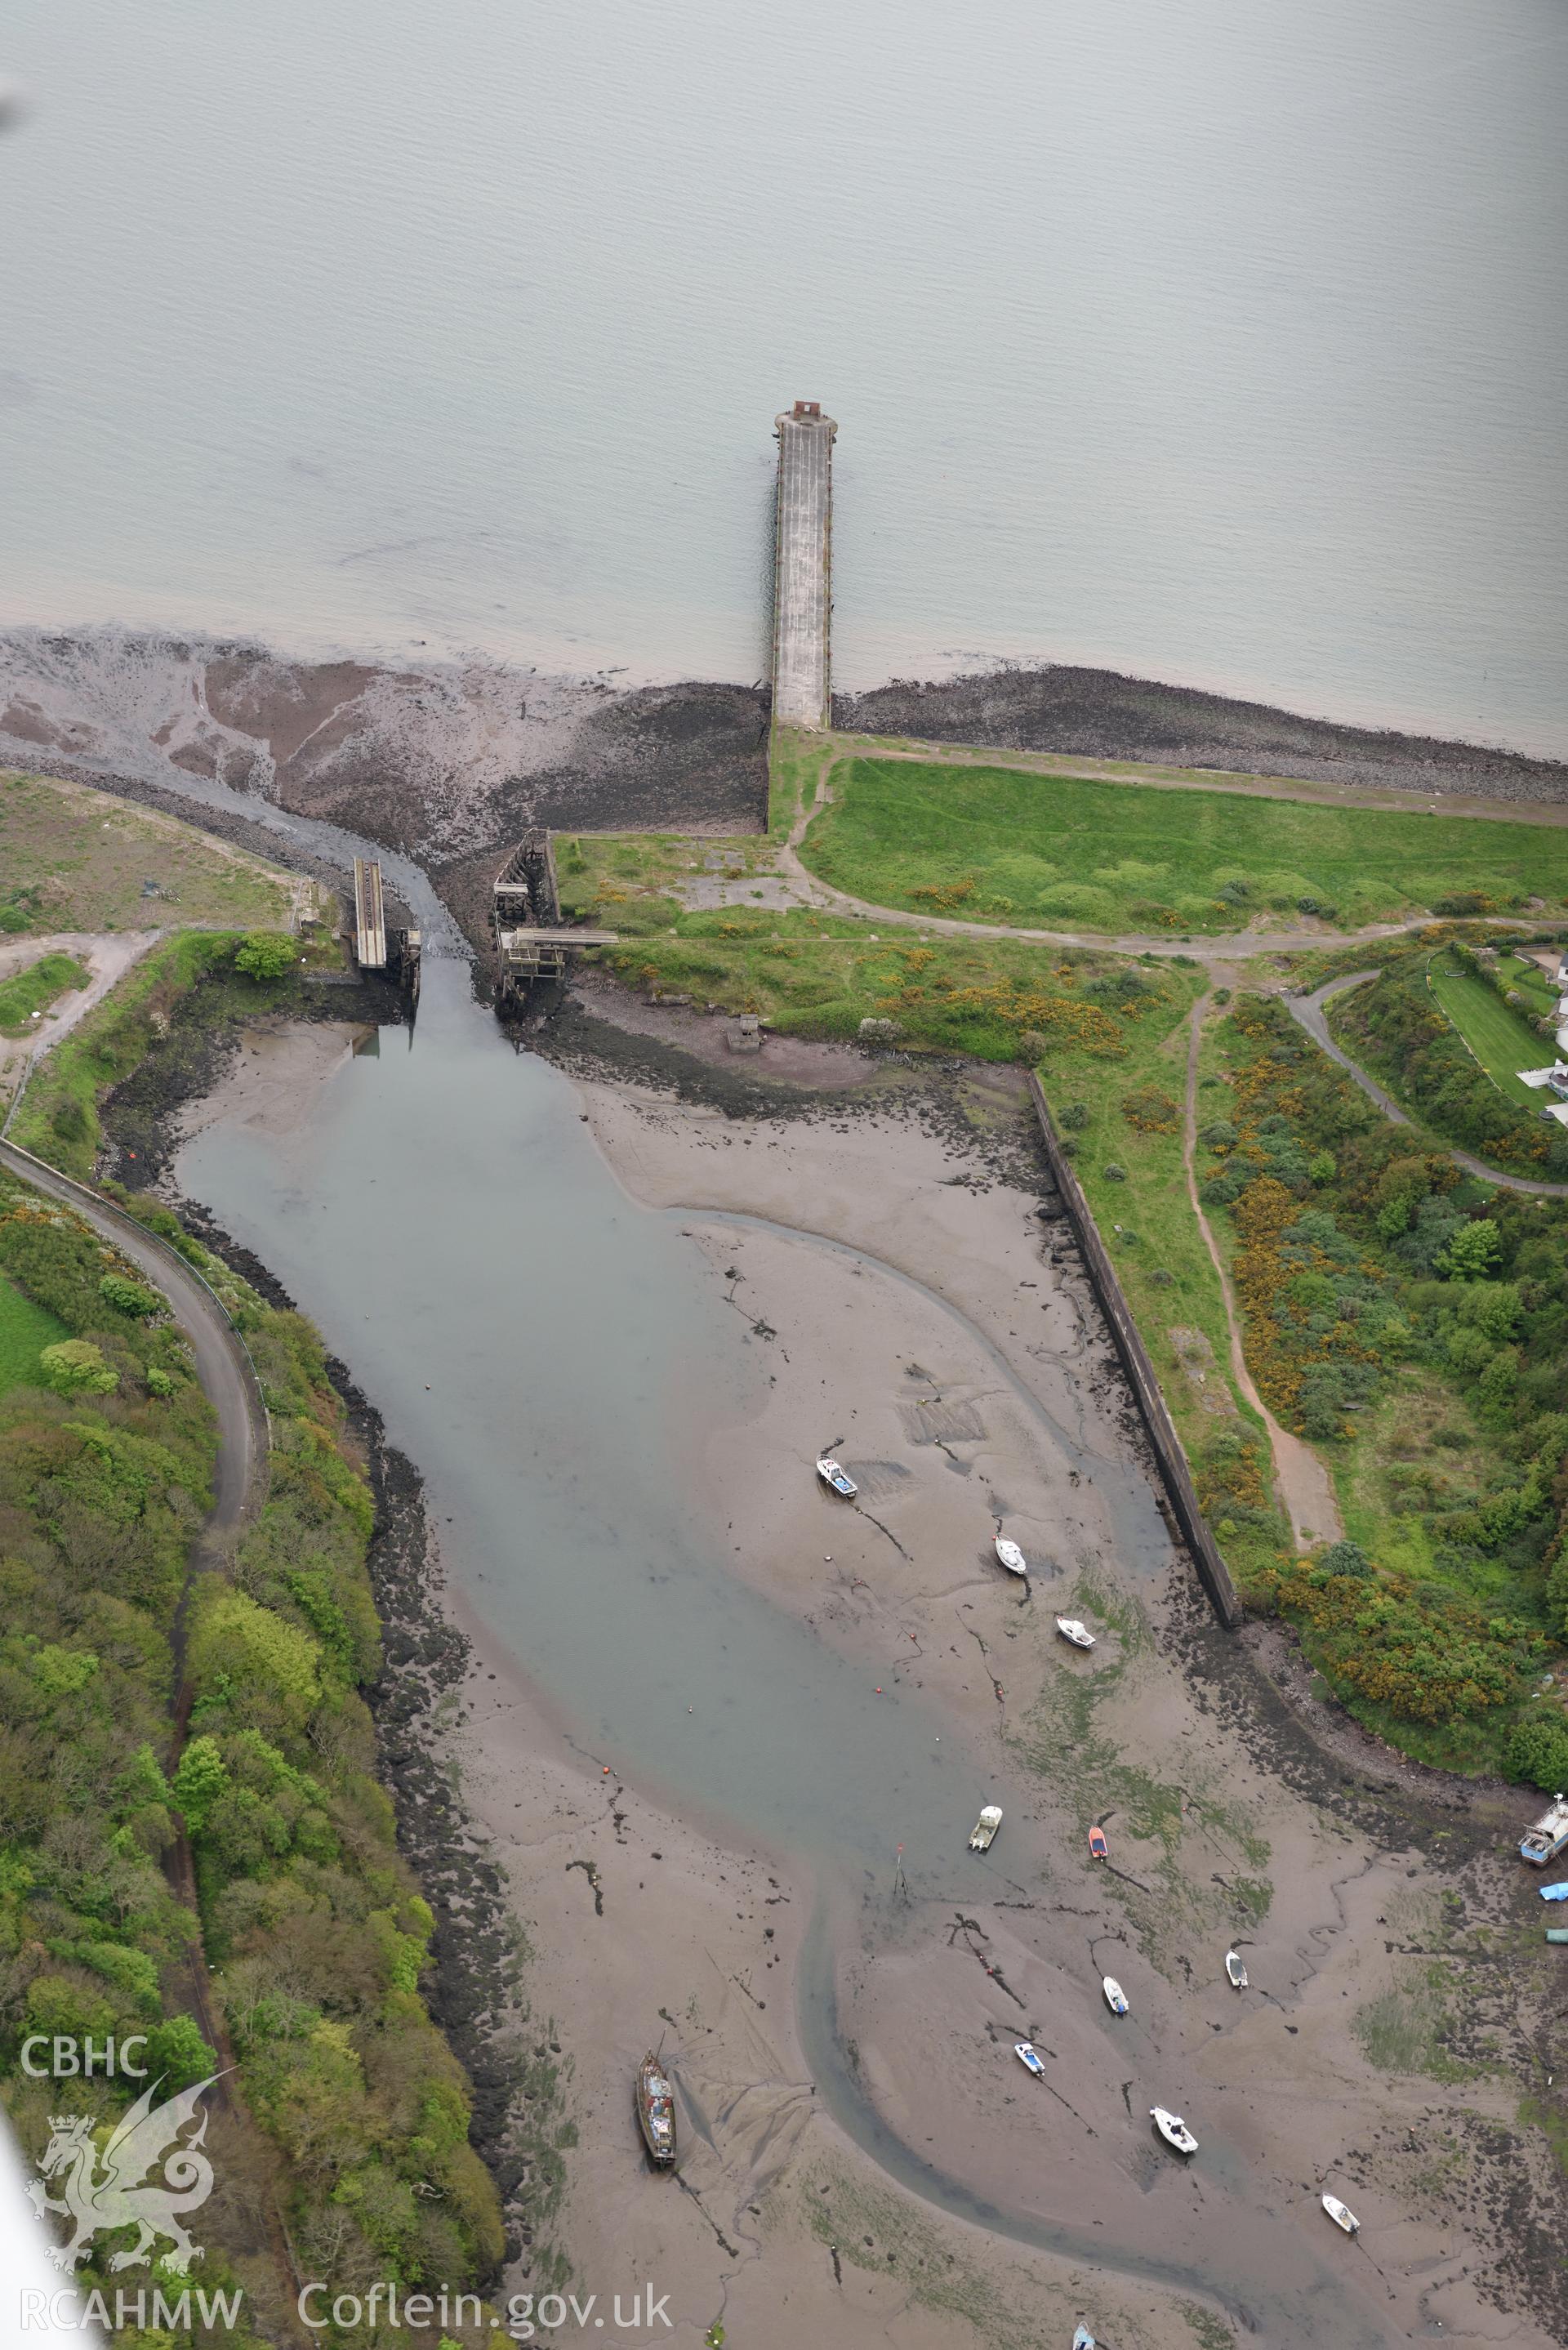 Castle Pill Railway Bridge at low tide. Baseline aerial reconnaissance survey for the CHERISH Project. ? Crown: CHERISH PROJECT 2017. Produced with EU funds through the Ireland Wales Co-operation Programme 2014-2020. All material made freely available through the Open Government Licence.